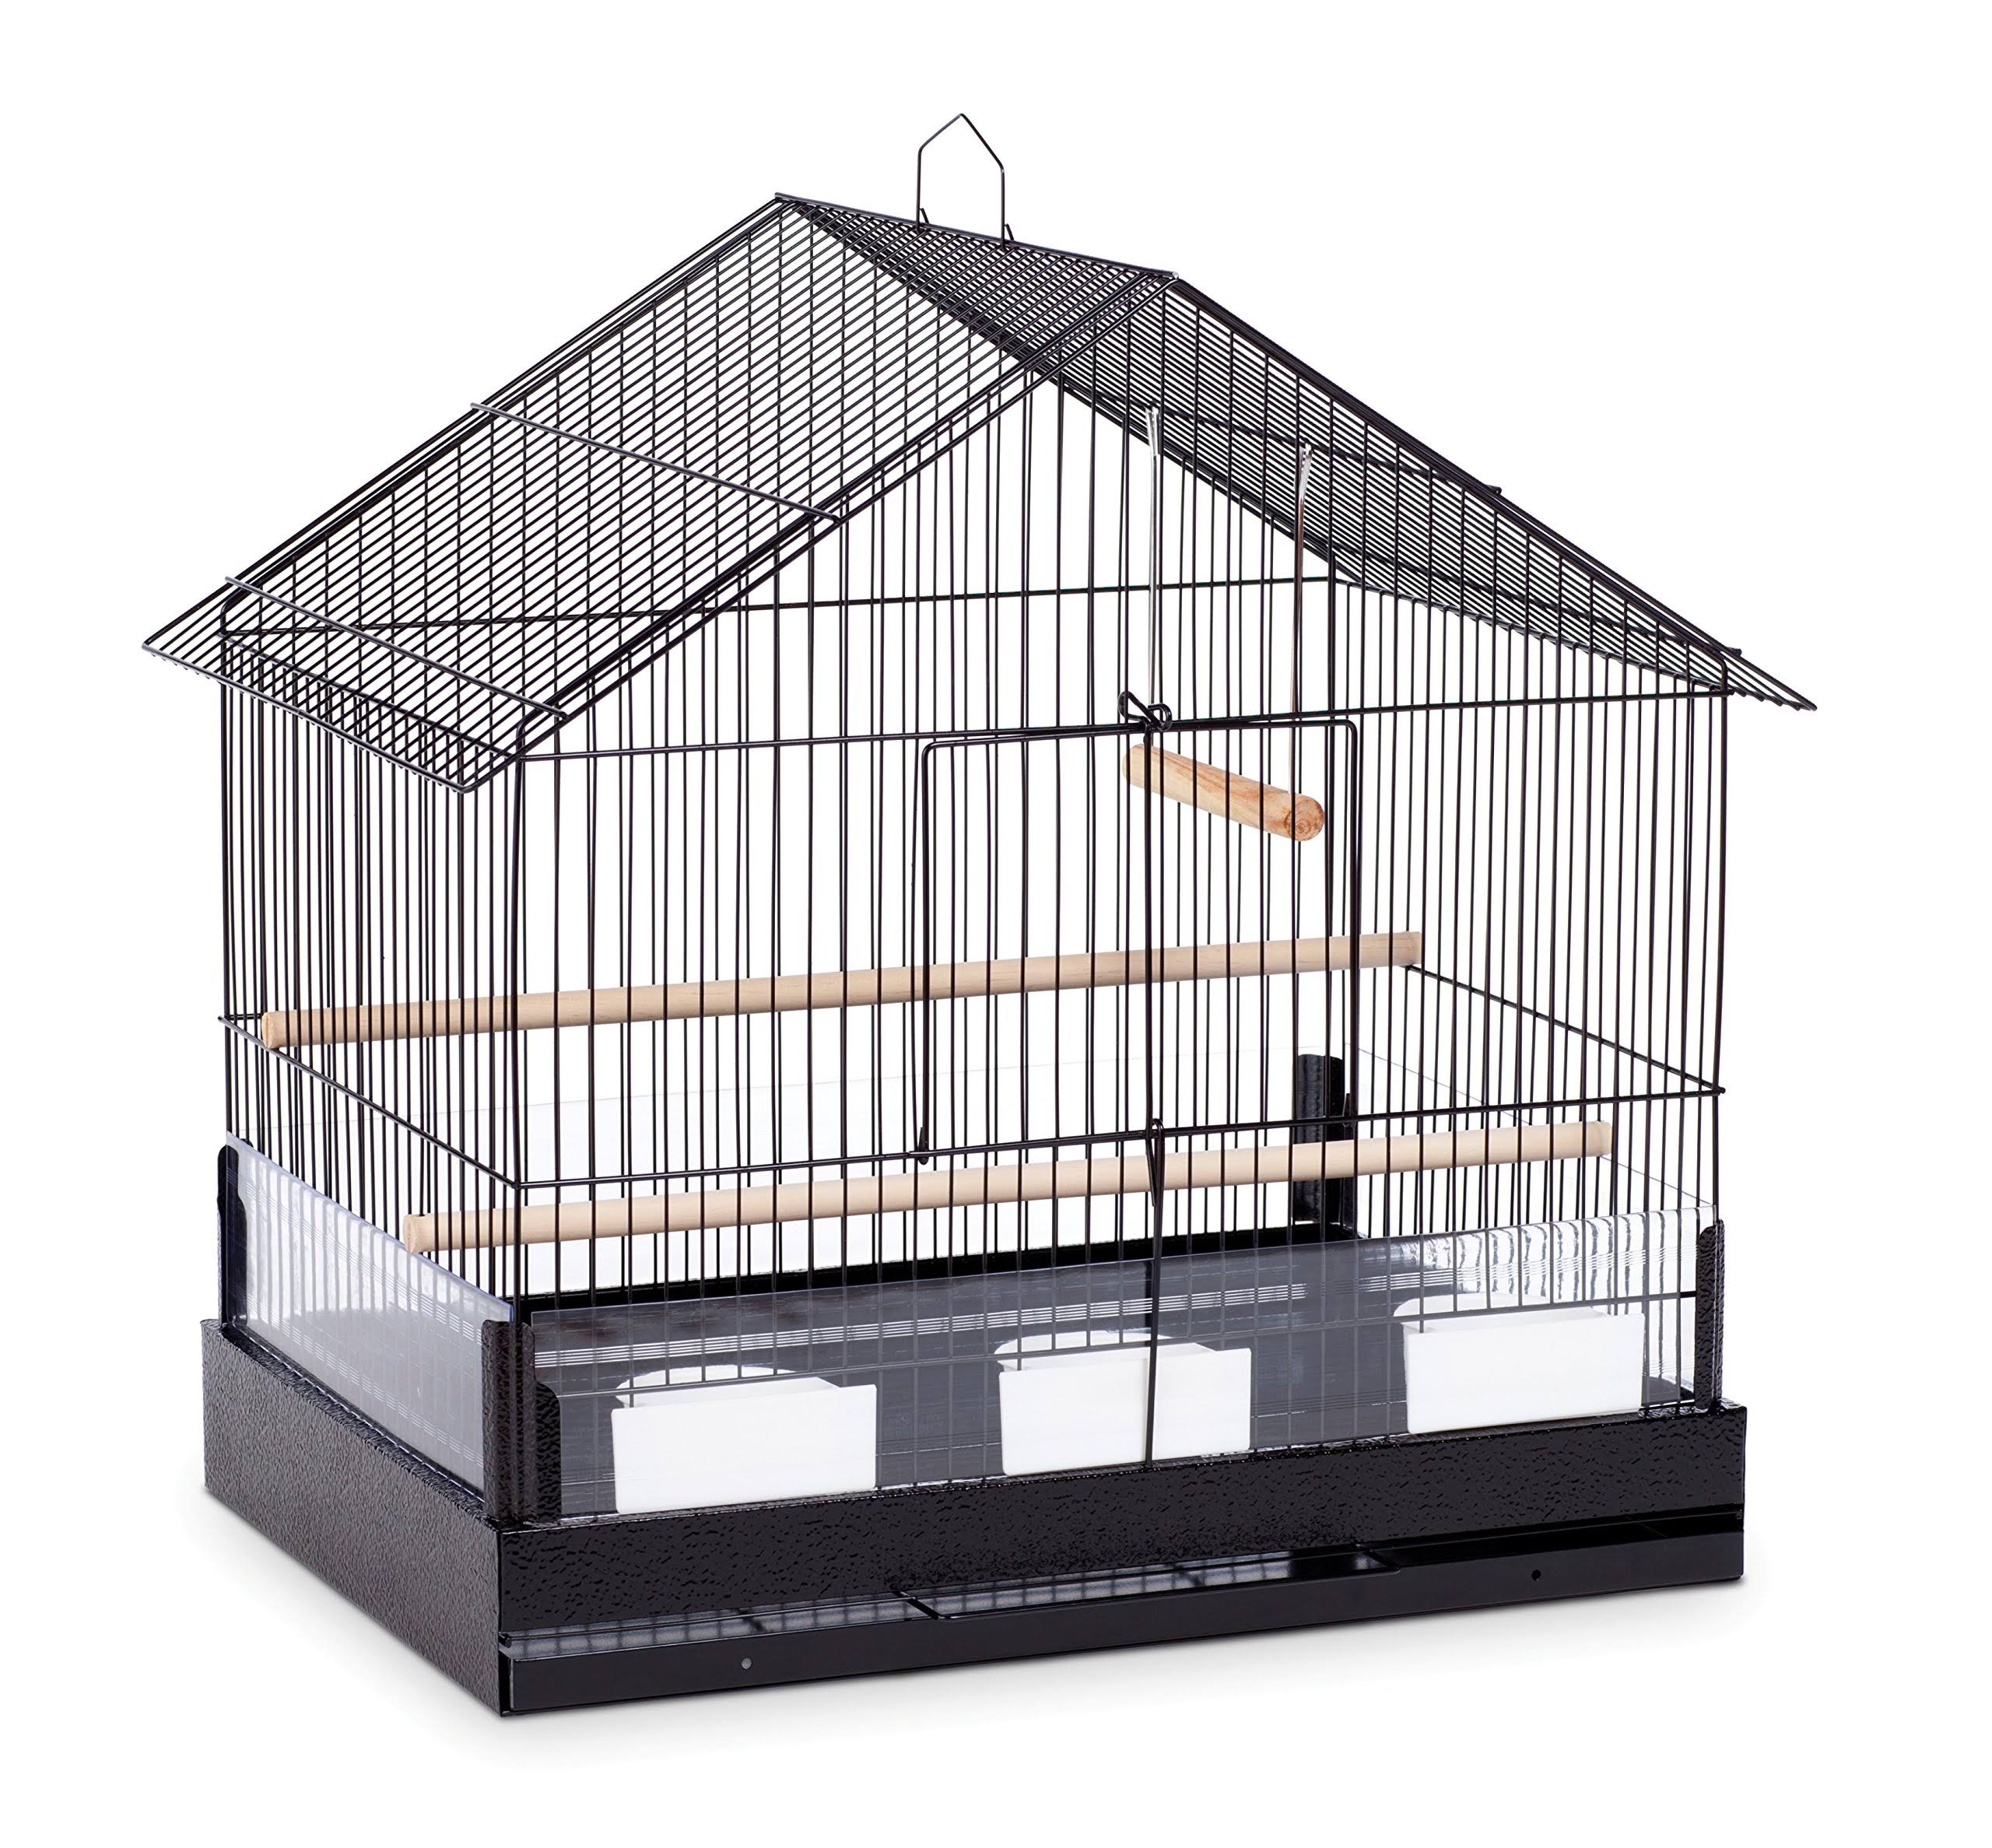 Prevue Pet Products Lincoln Bird Cage Black 22 x 15 x 23 Inches (110B)